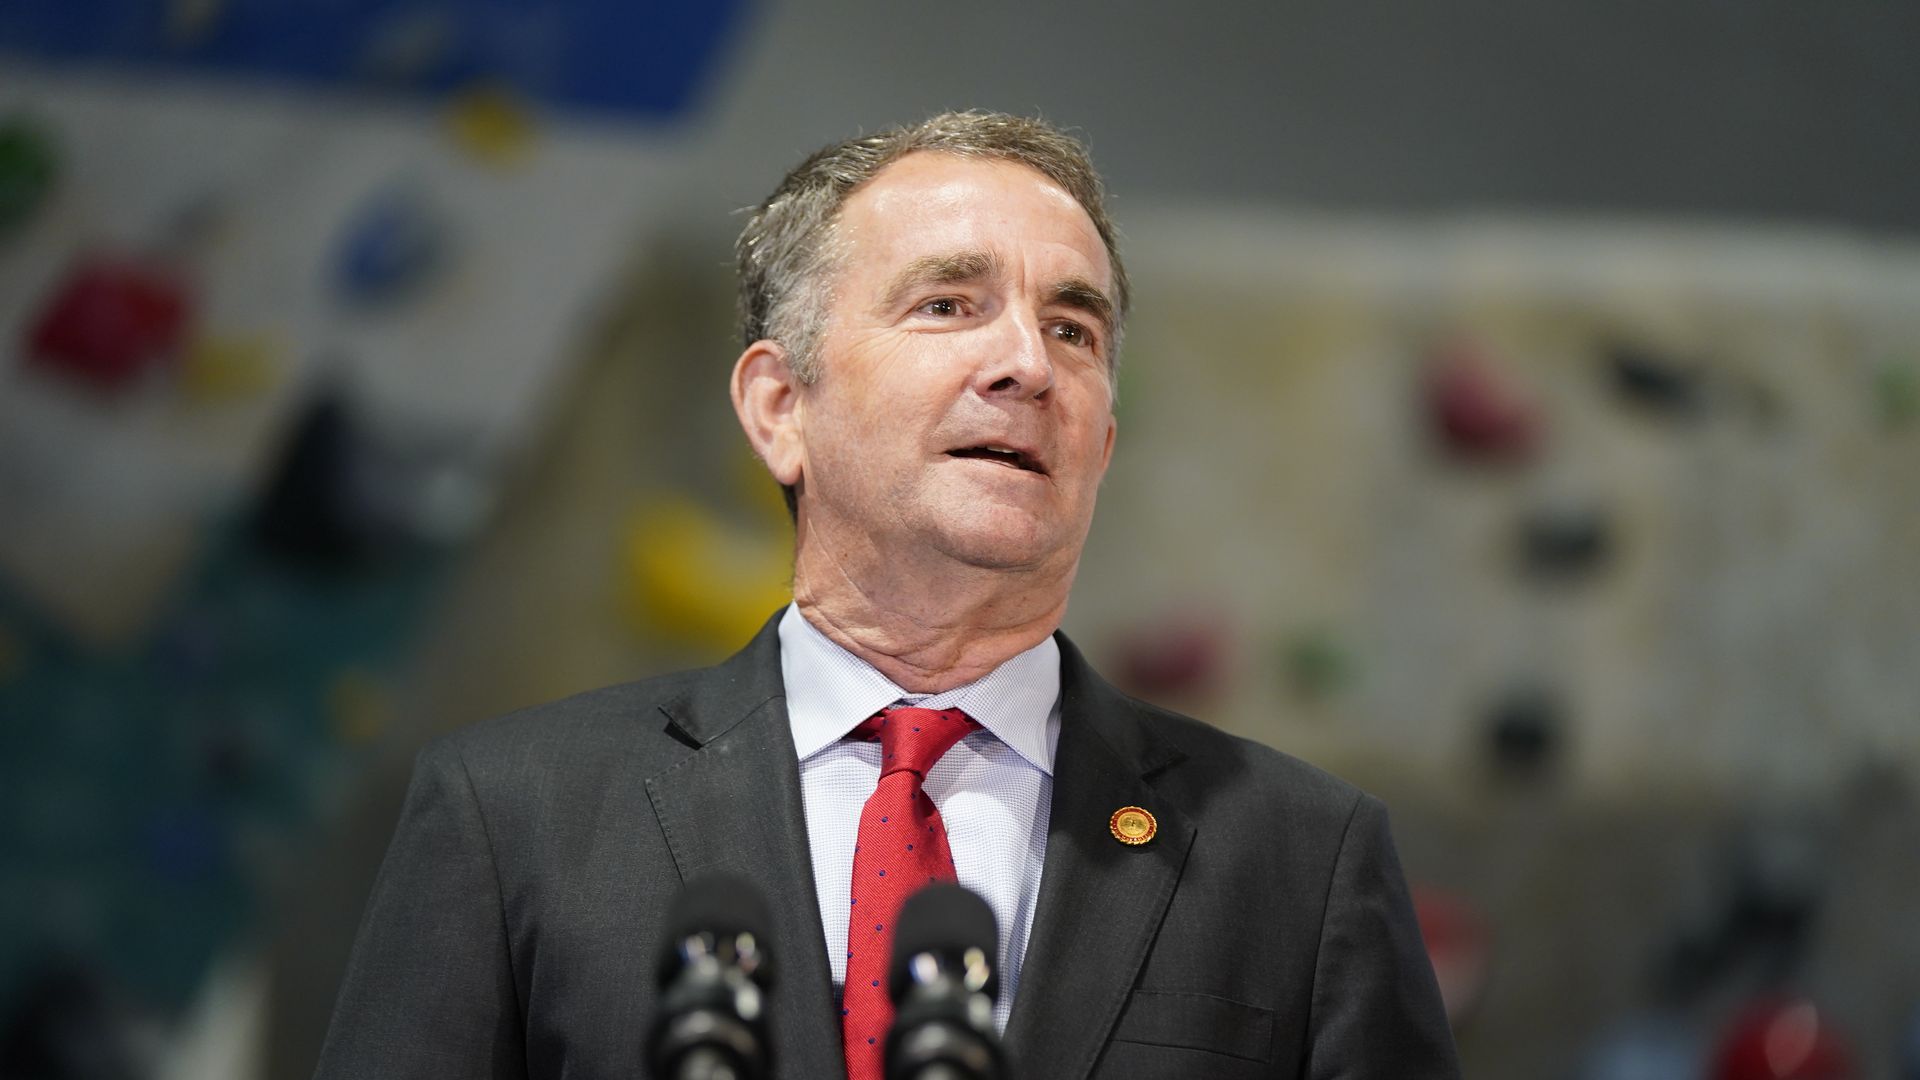 Ralph Northam, governor of Virginia, speaks at Sportrock Climbing Center during an event in Alexandria, Virginia, U.S., on Friday, May 28, 2021. 